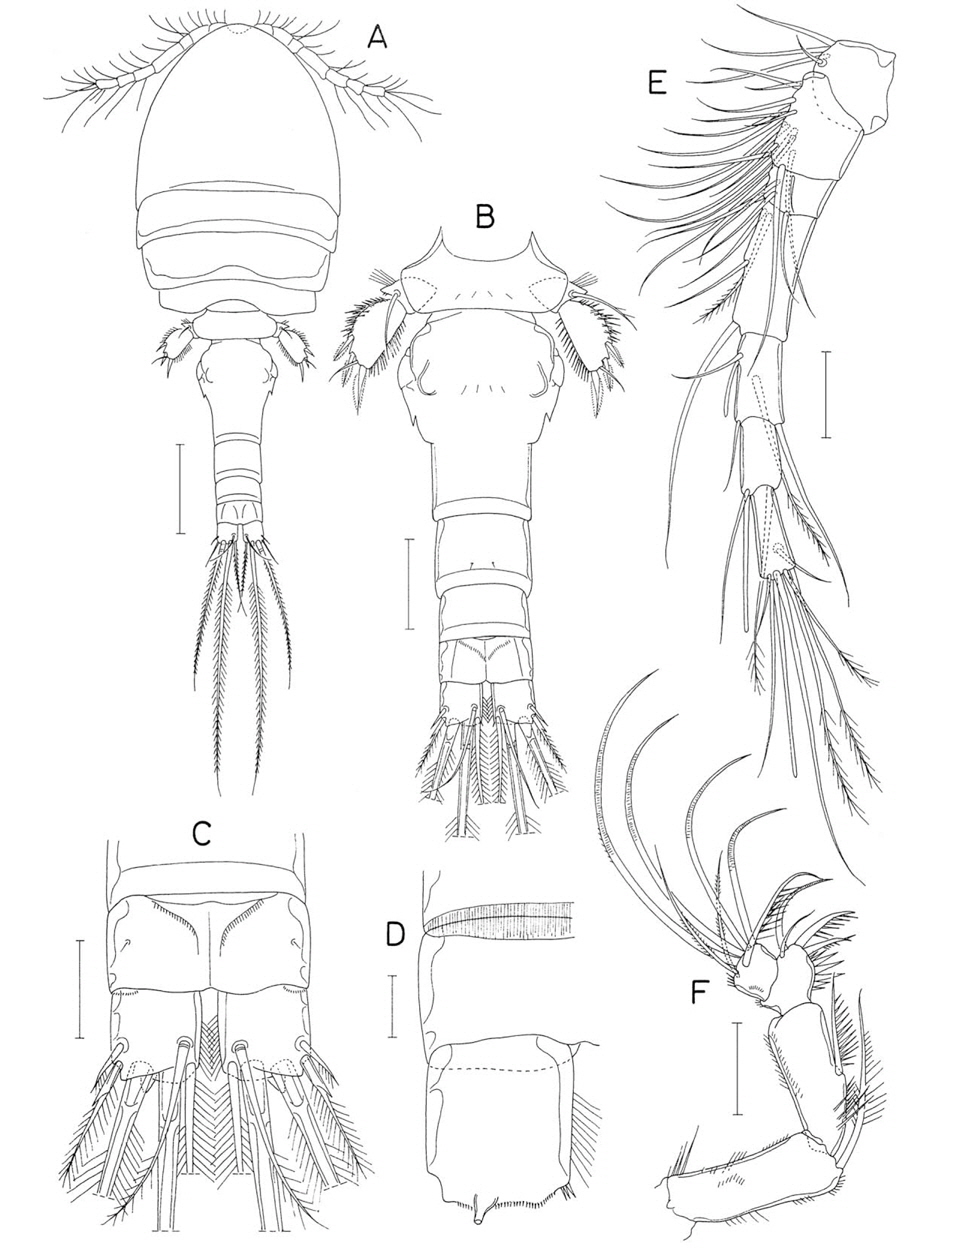 Hemicyclops parapiculus n. sp., female. A, Habitus, dorsal; B, Urosome, dorsal; C, Anal somite and caudal rami, dorsal; D, Right side of anal somite and right caudal ramus, ventral; E, Antennule; F, Antenna. Scale bars: A=0.2 mm, B=0.1 mm, C, E, F=0.05 mm, D=0.02 mm.